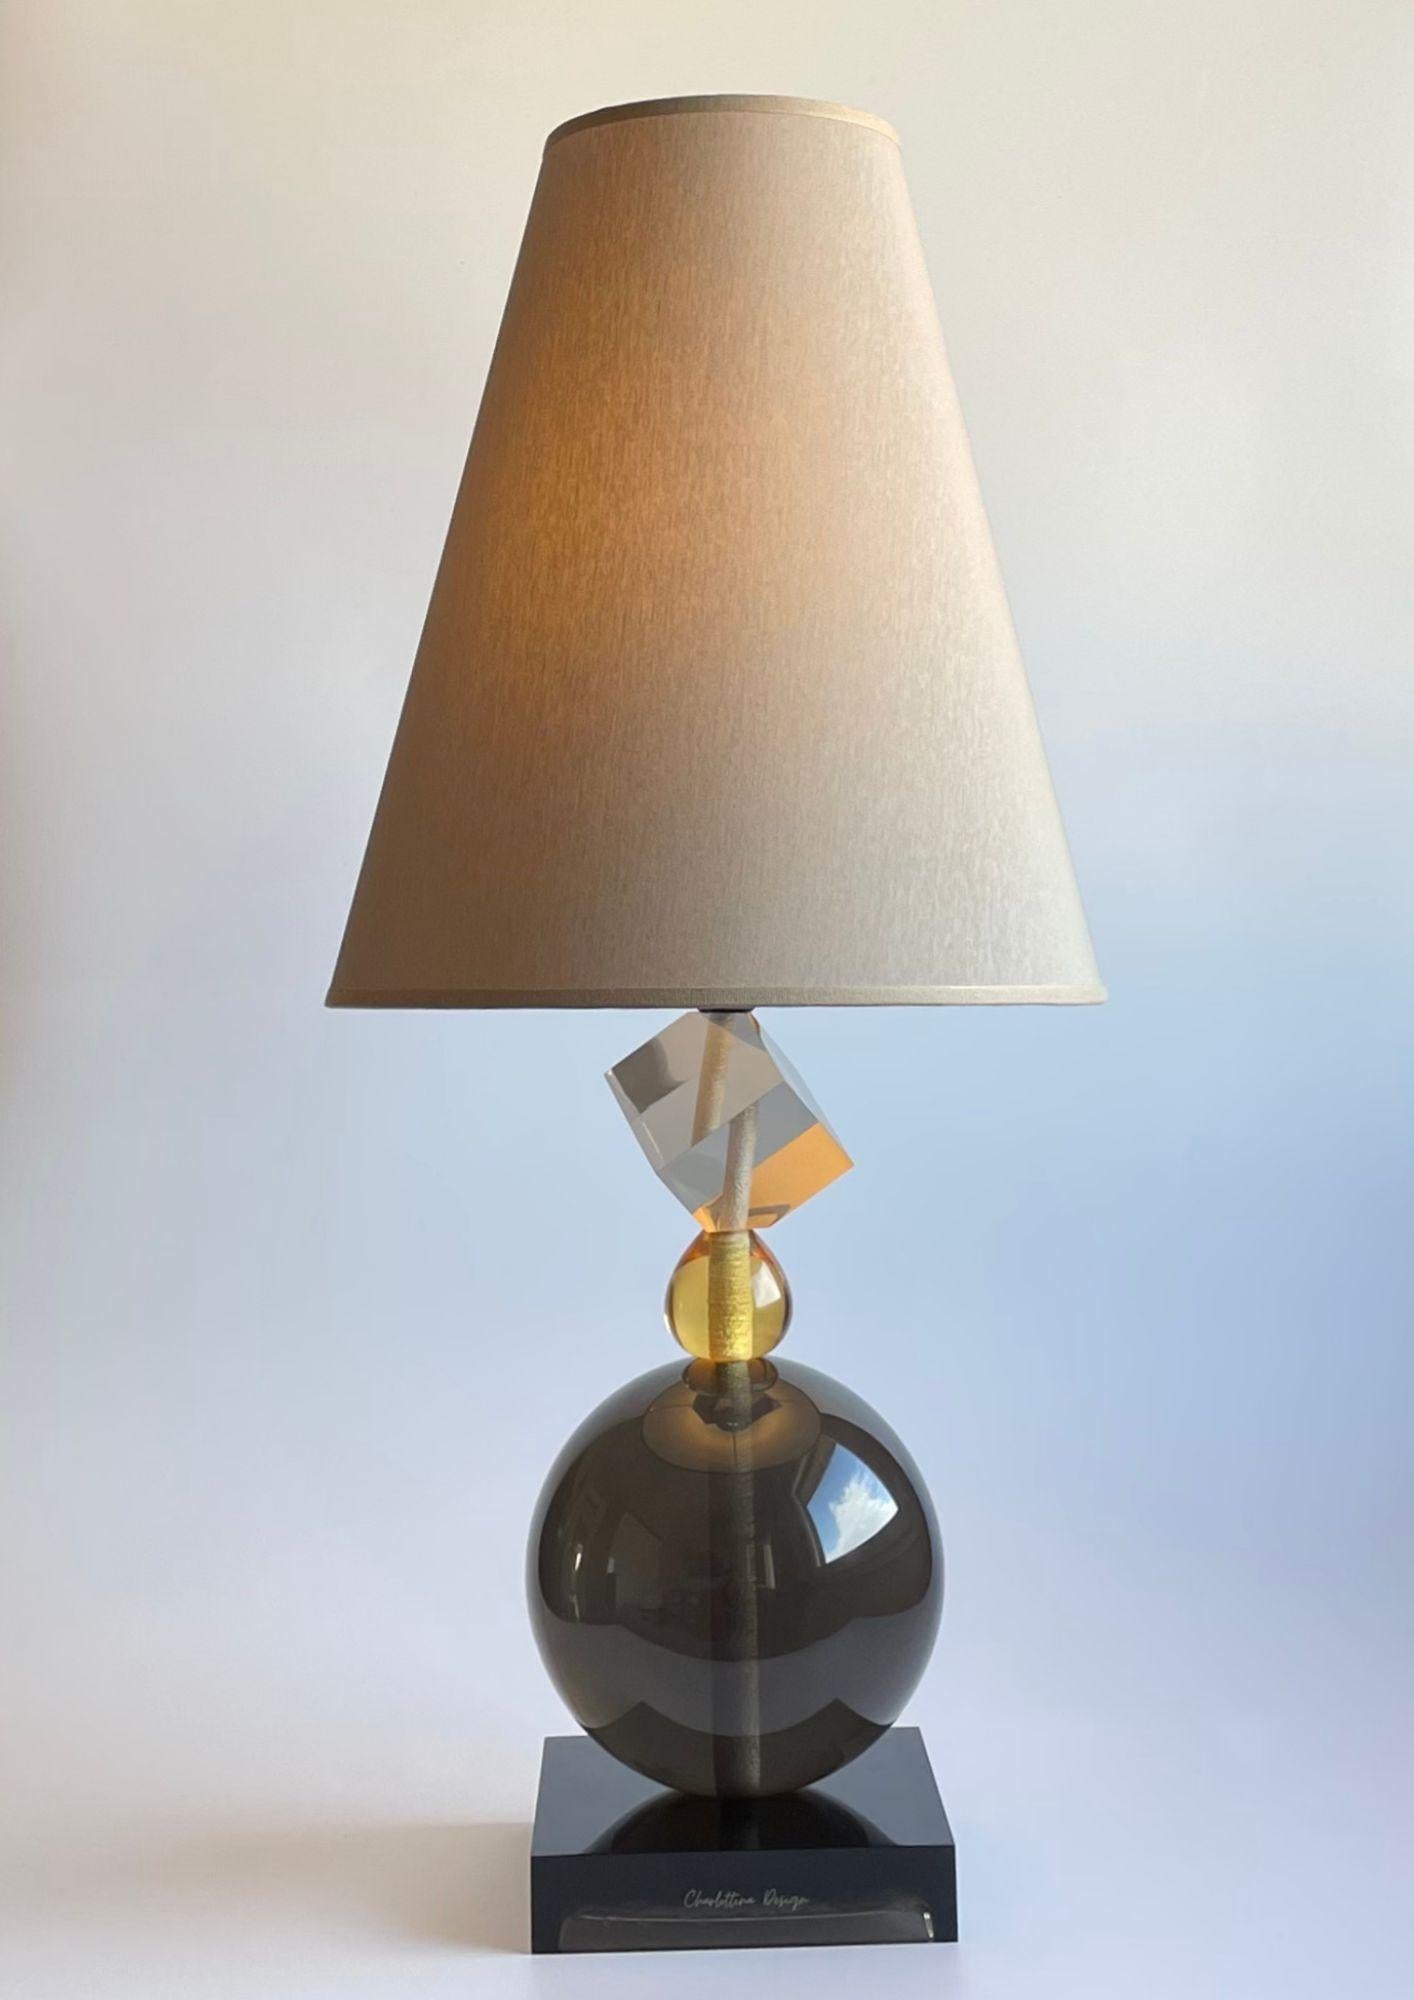 The Charlottina Design is a handcrafted resin table lamp with 100% Italian handmade cotton shade for design and manufacture.
Charlottina Design lamps are jewels of light that grace living rooms, bedrooms, offices. They fit casually, but always